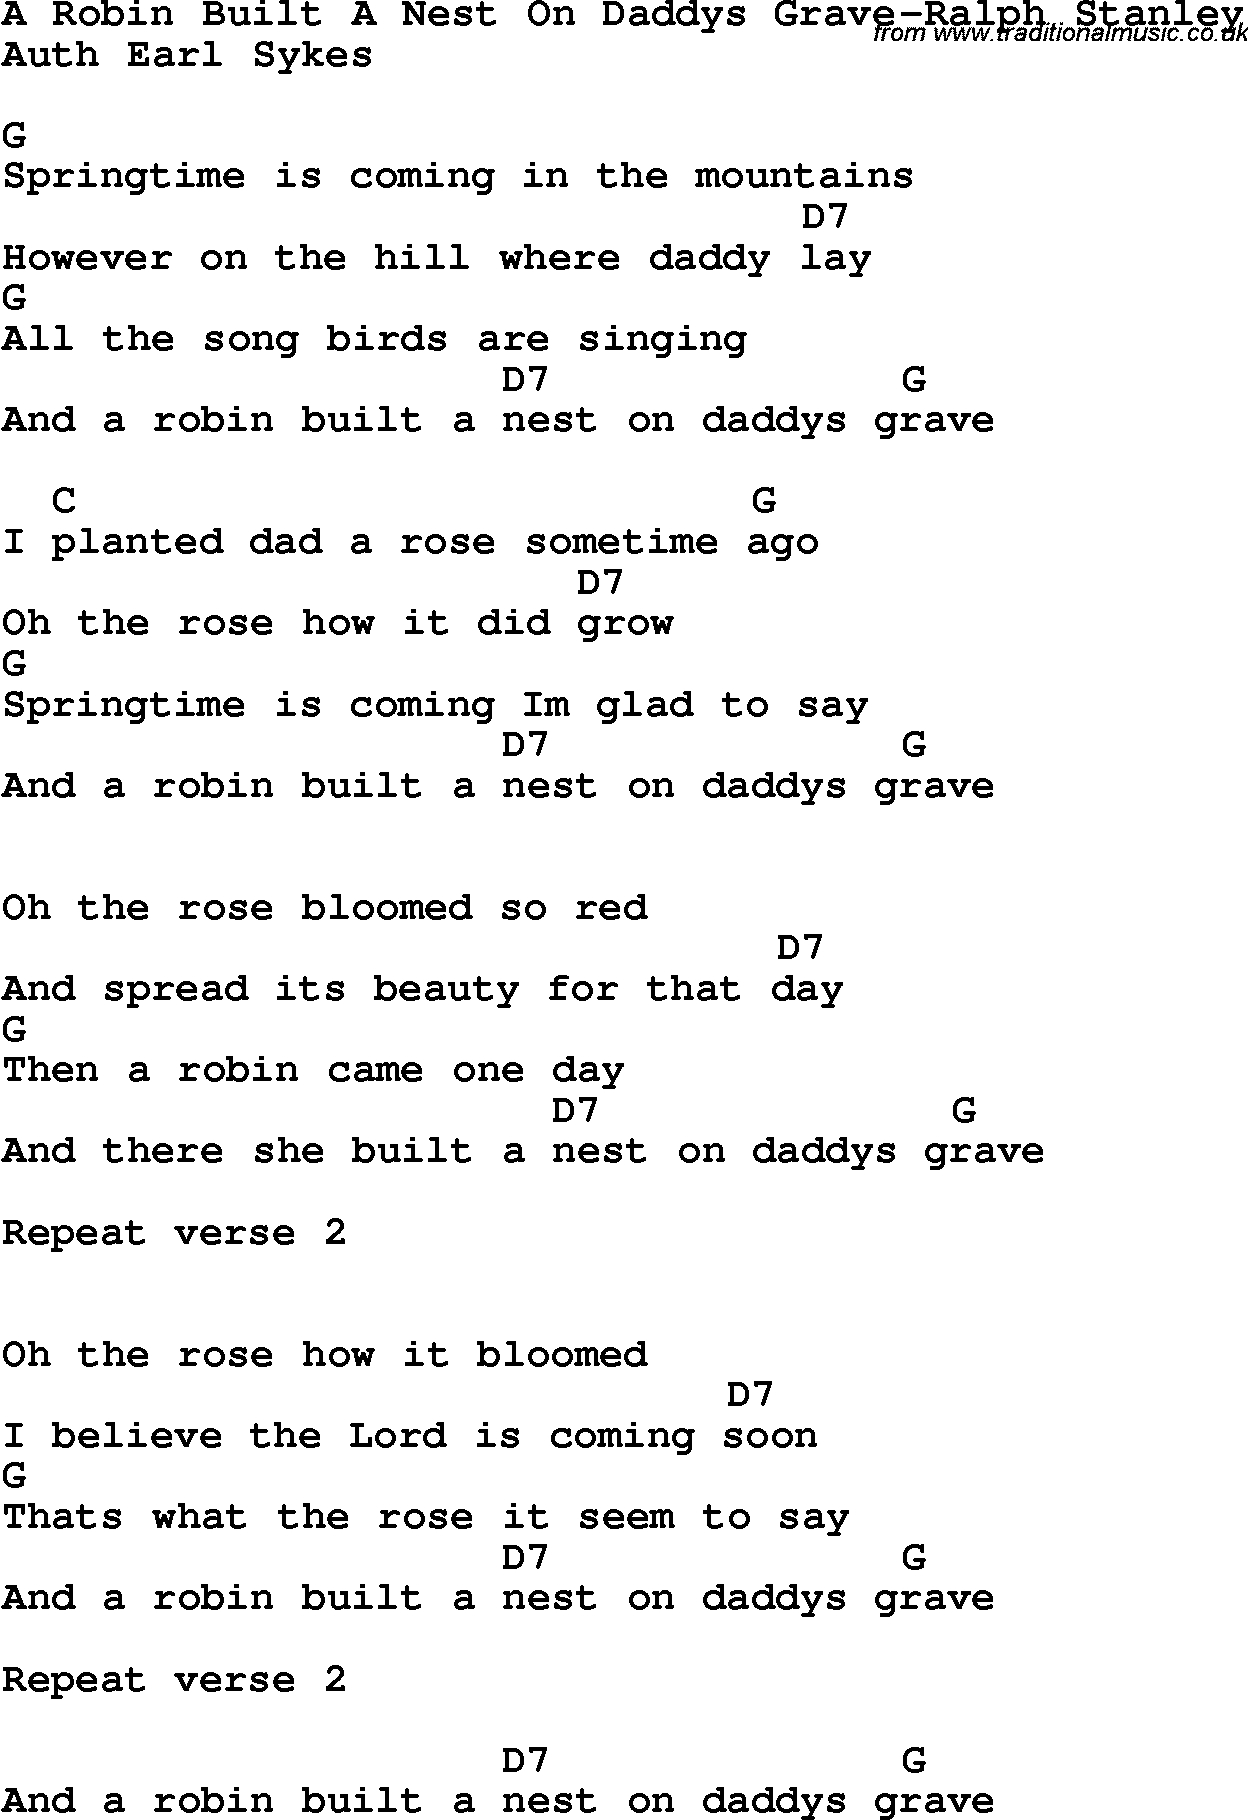 Country, Southern and Bluegrass Gospel Song A Robin Built A Nest On Daddy’s Grave-Ralph Stanley lyrics and chords